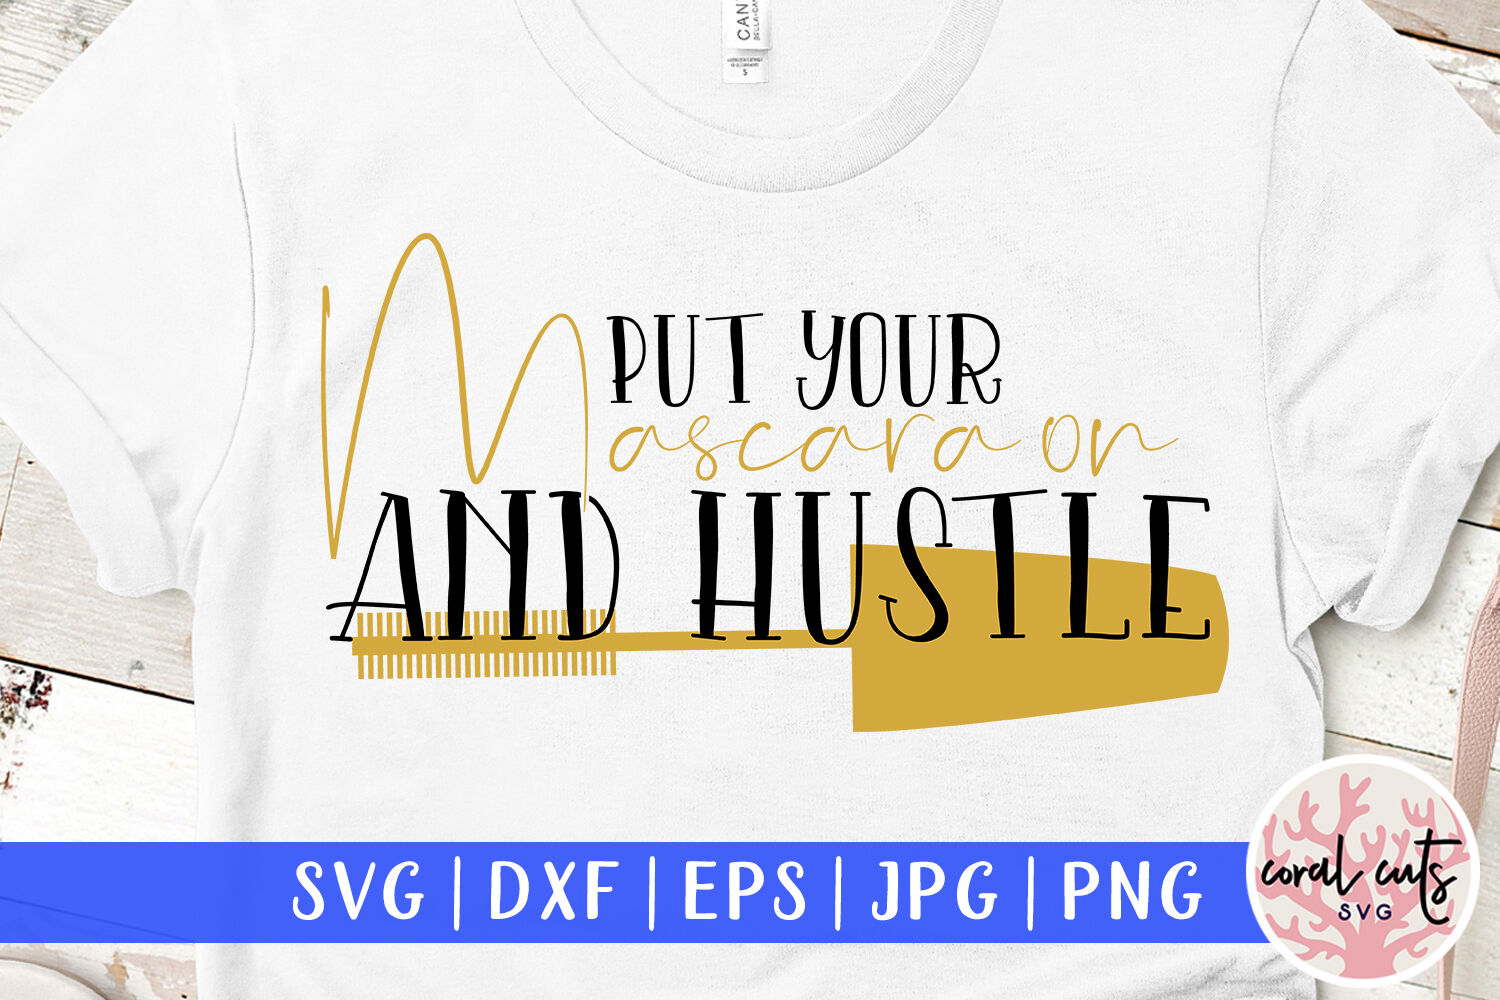 Put Your Mascara On And Hustle Women Hustler Svg Eps Dxf Png By Coralcuts Thehungryjpeg Com